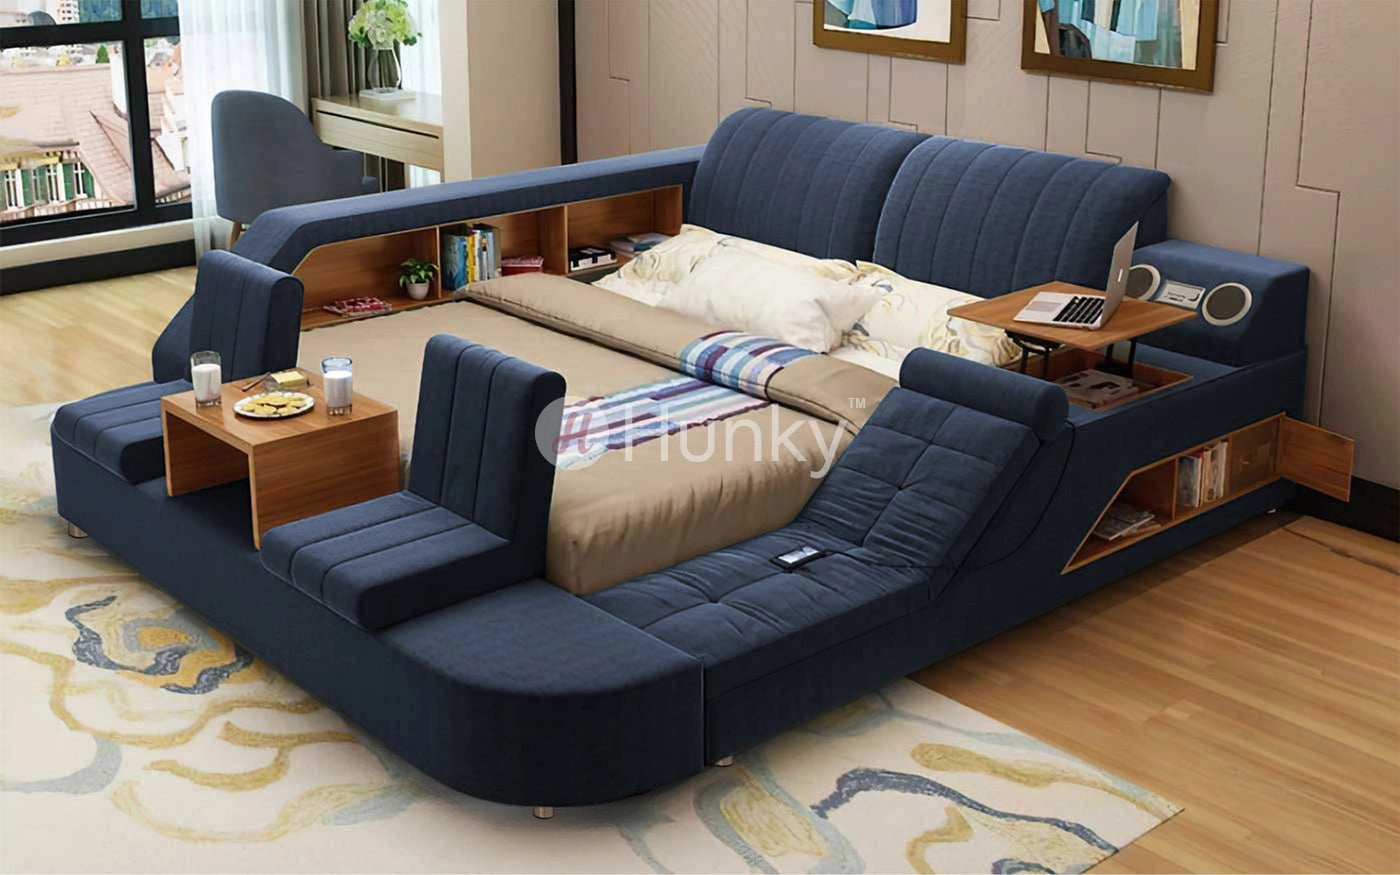 Hunky Multifunction Ultimate Smart Bed With Built-in Massage Chair, Speakers and Storage